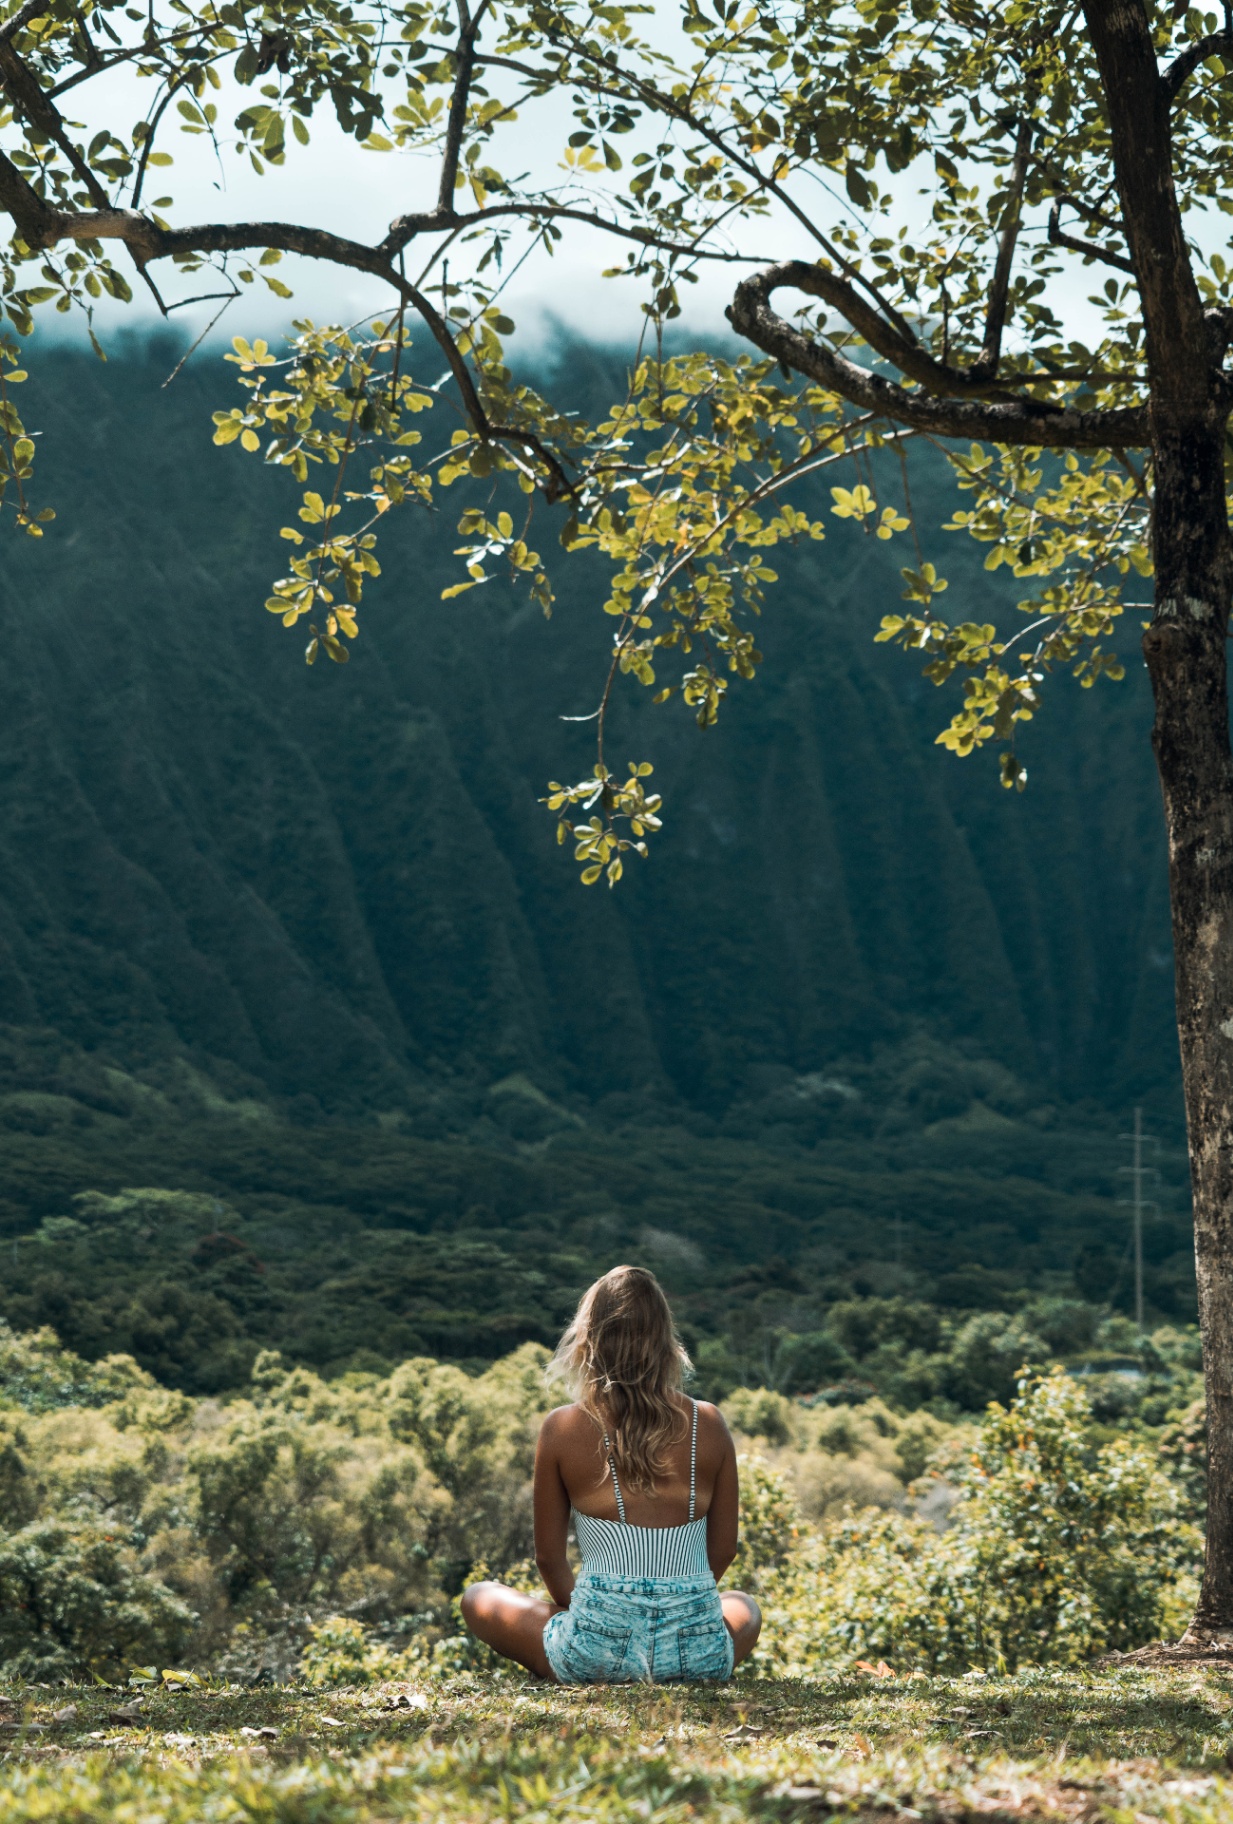 A woman meditating by a tree. Representing the Mindfulness-Based techniques The Mindful Practice therapist will teach their clients in Orlando, FL, and virtually across the state of Florida.